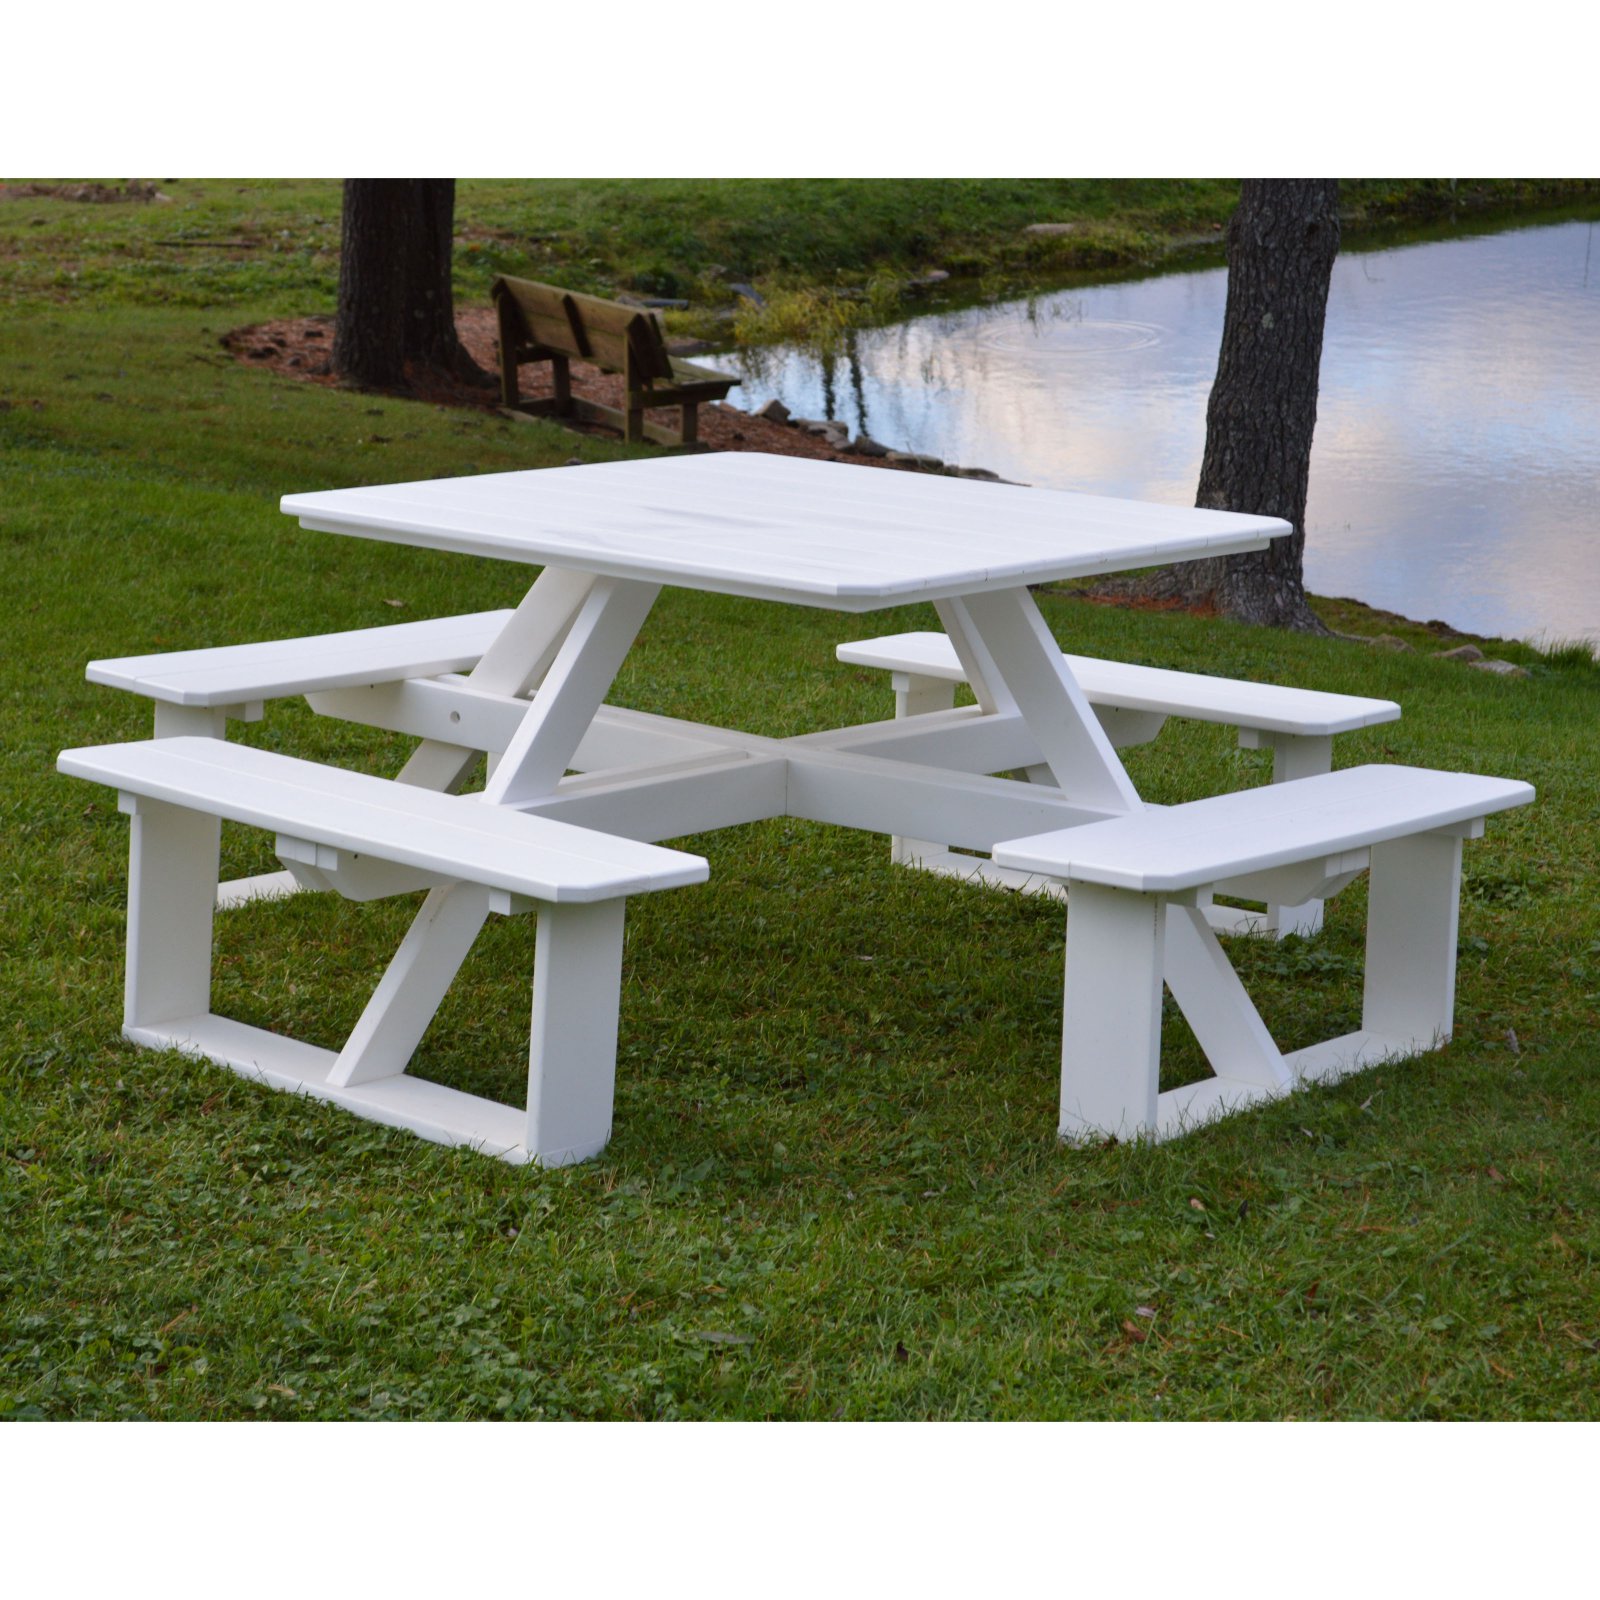 A &amp; L Furniture 44 in. Square Picnic Table with Optional 2 in. Umbrella Hole - image 1 of 1